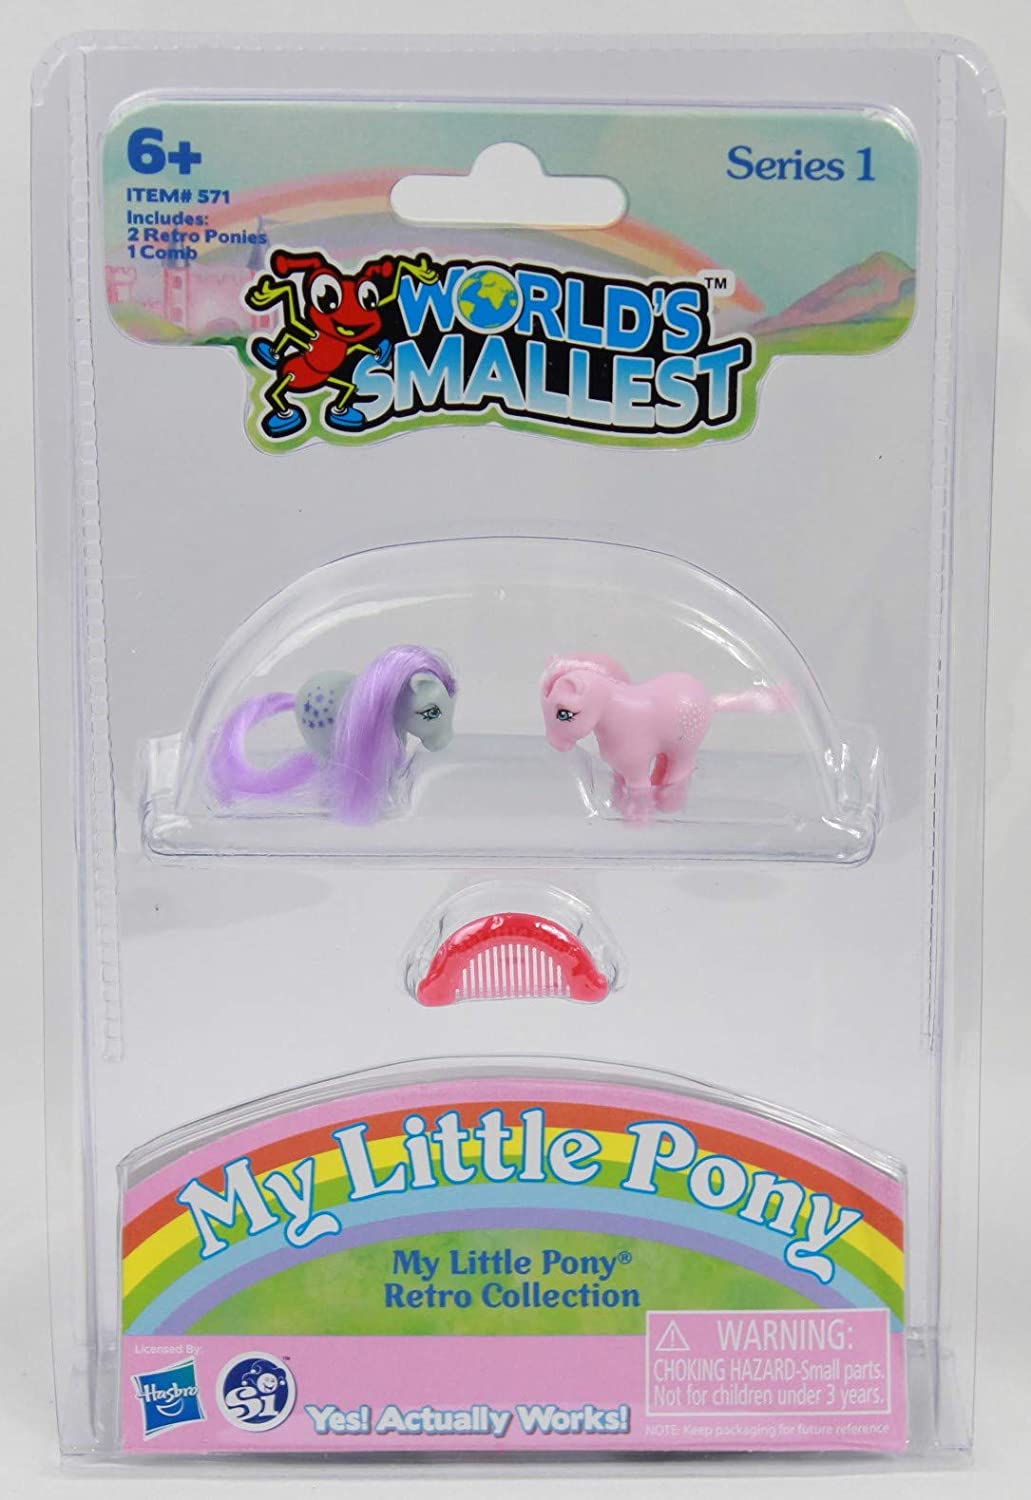 World's Smallest My Little Pony Retro Collection